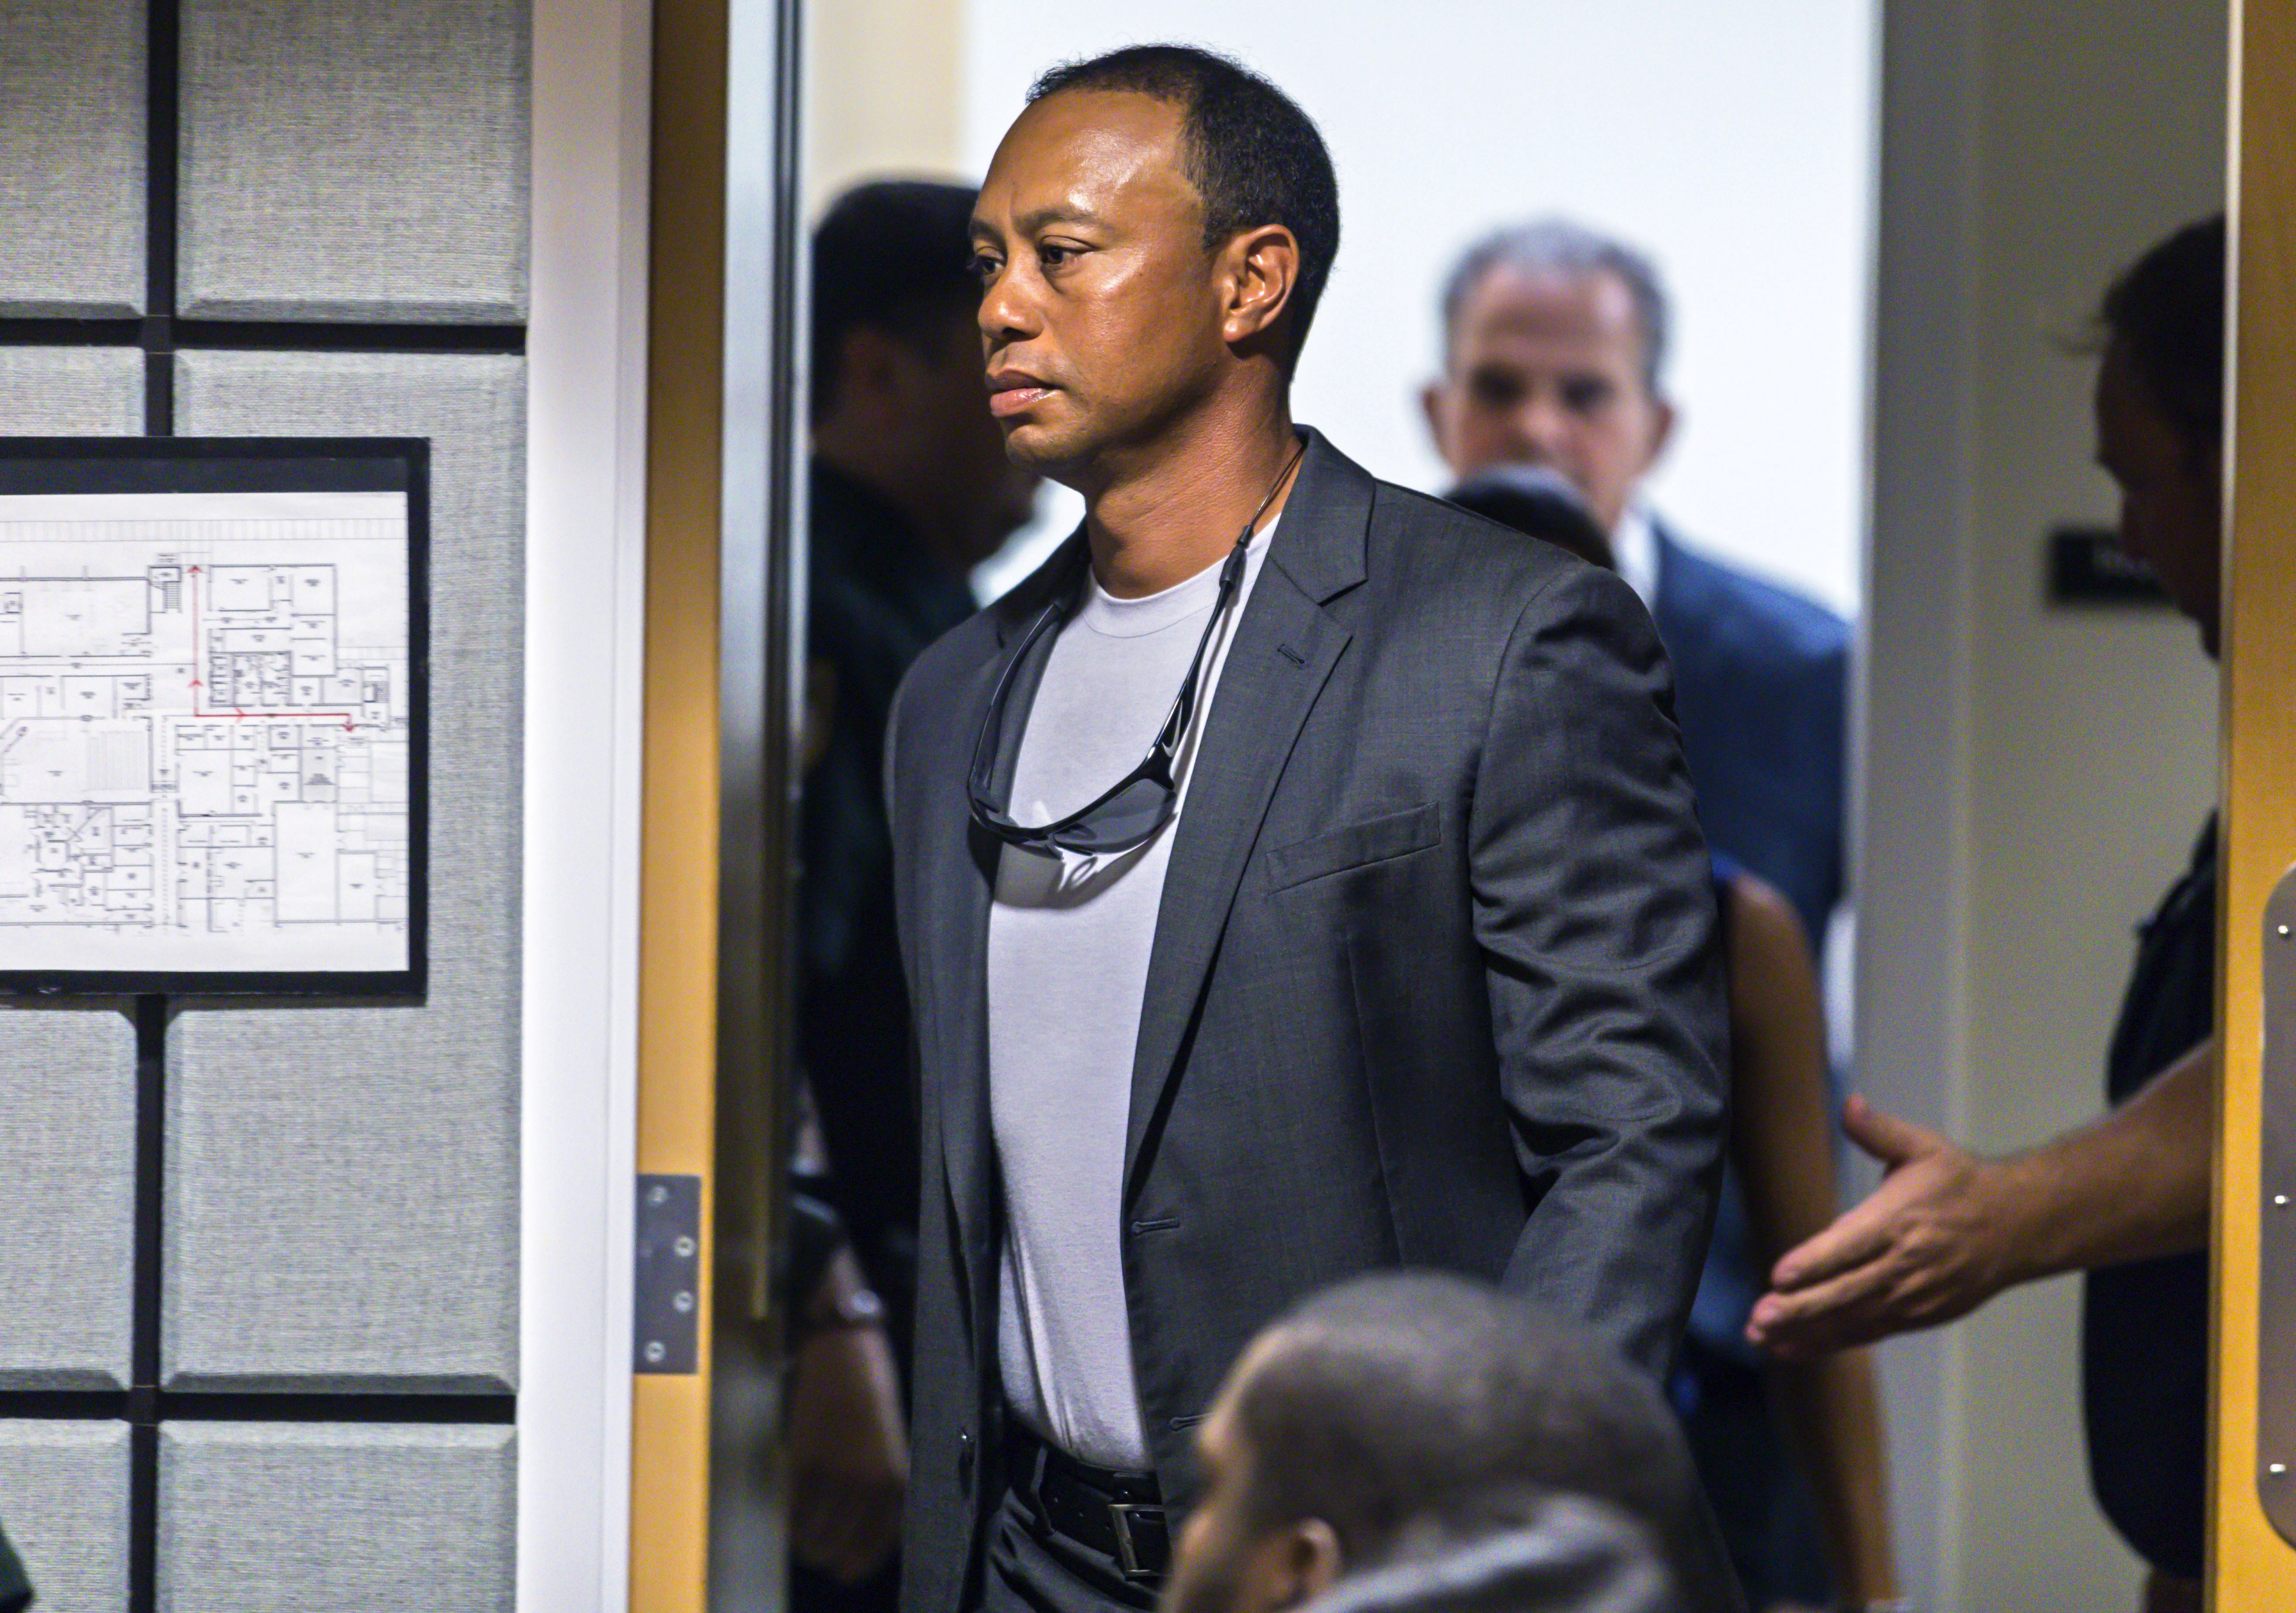 Tiger Woods enters Palm Beach County court October 27, 2017. | Photo: GettyImages